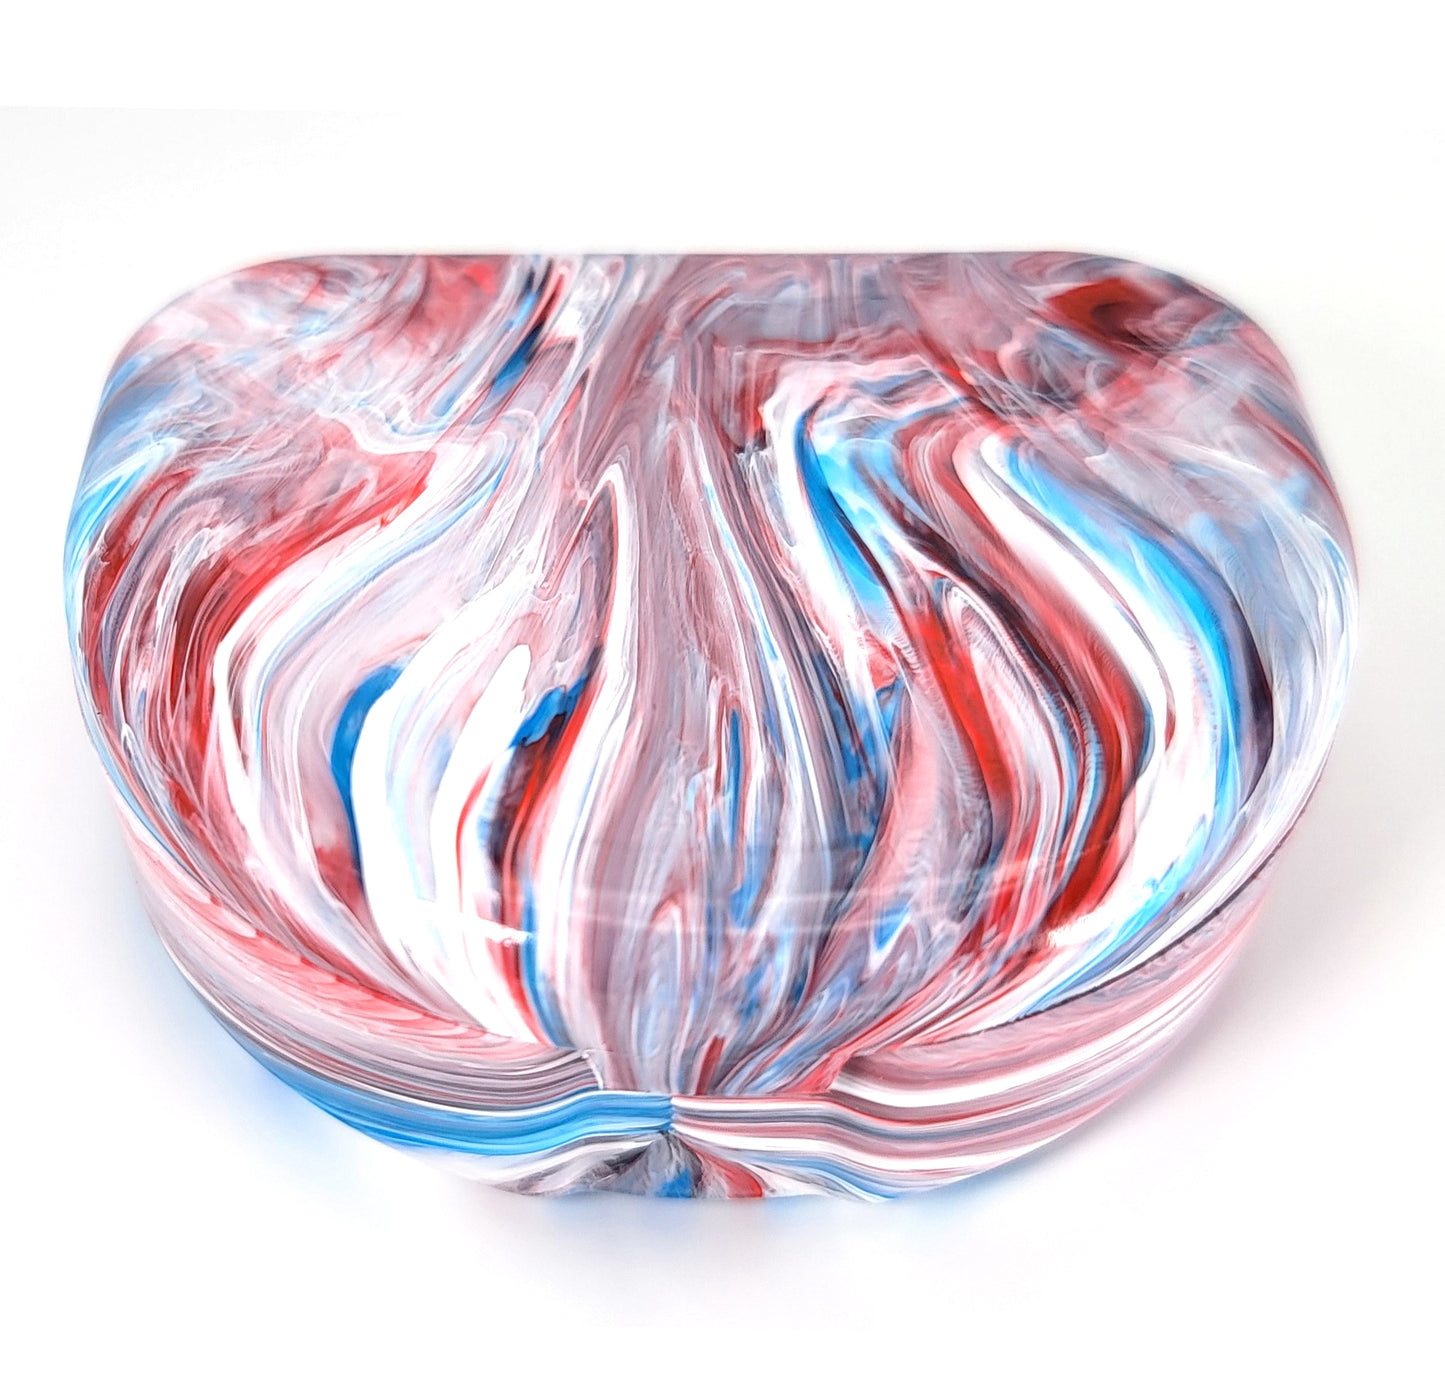 Retainer Case - Color Splash Collection - Red White Blue